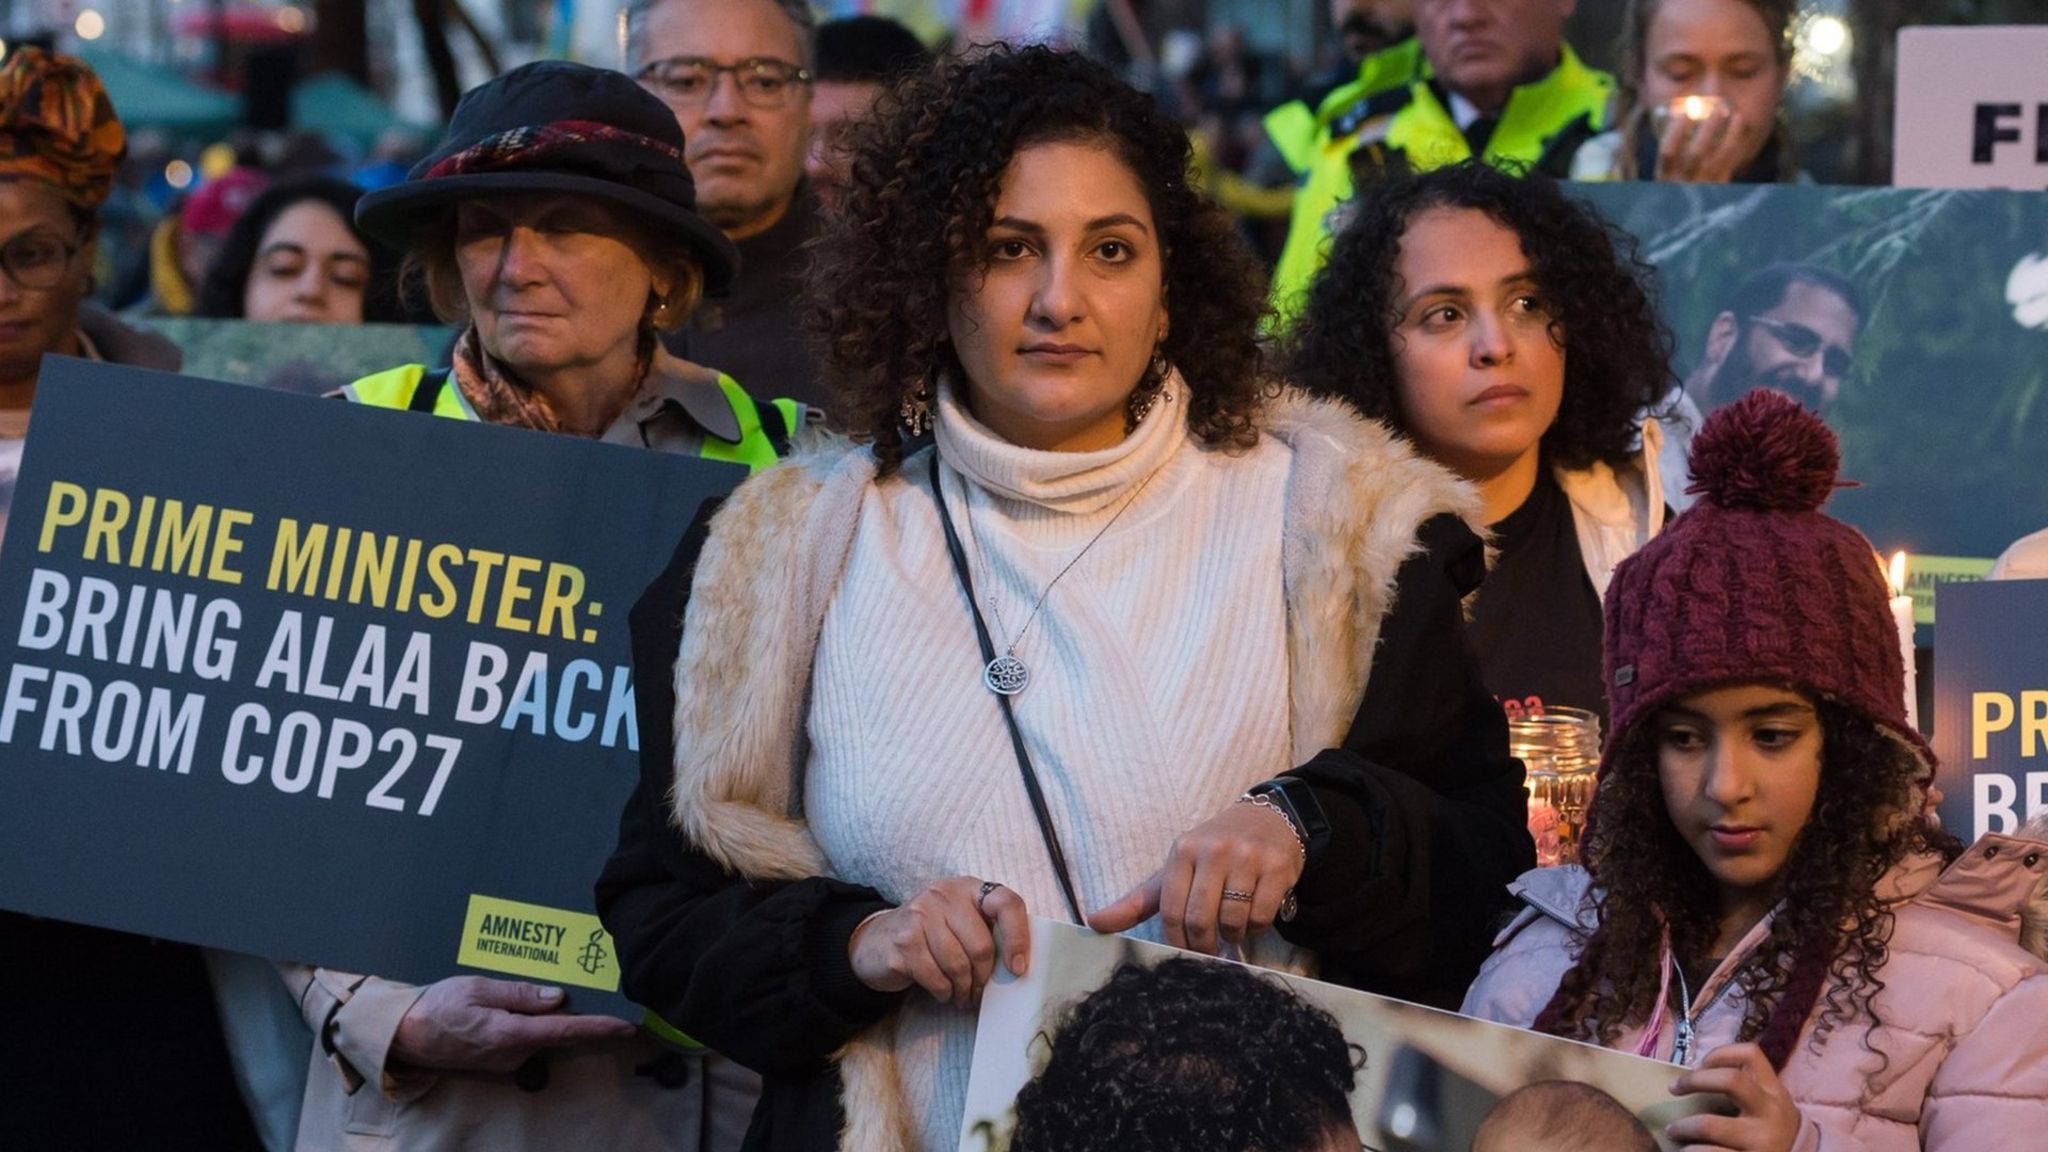 The sister of jailed British-Egyptian activist Alaa Abdel Fattah, Mona Seif (C) attends a nigh-time vigil in London to call on the British prime minister to secure his release at the COP27 summit (6 November 2022)